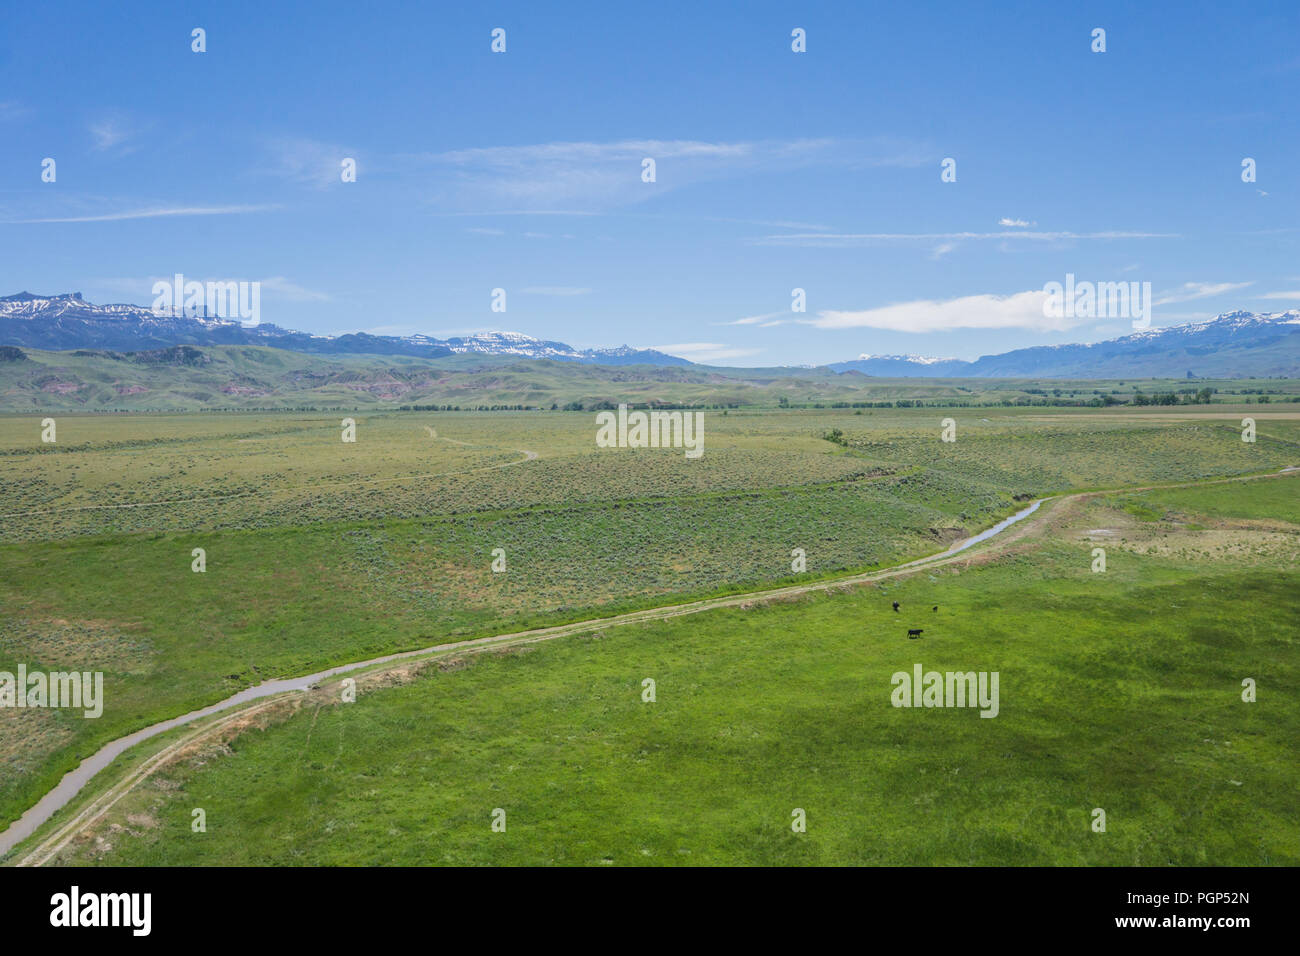 Broad green farming fields in western Wyoming with Rocky Mountains in the distance. Stock Photo